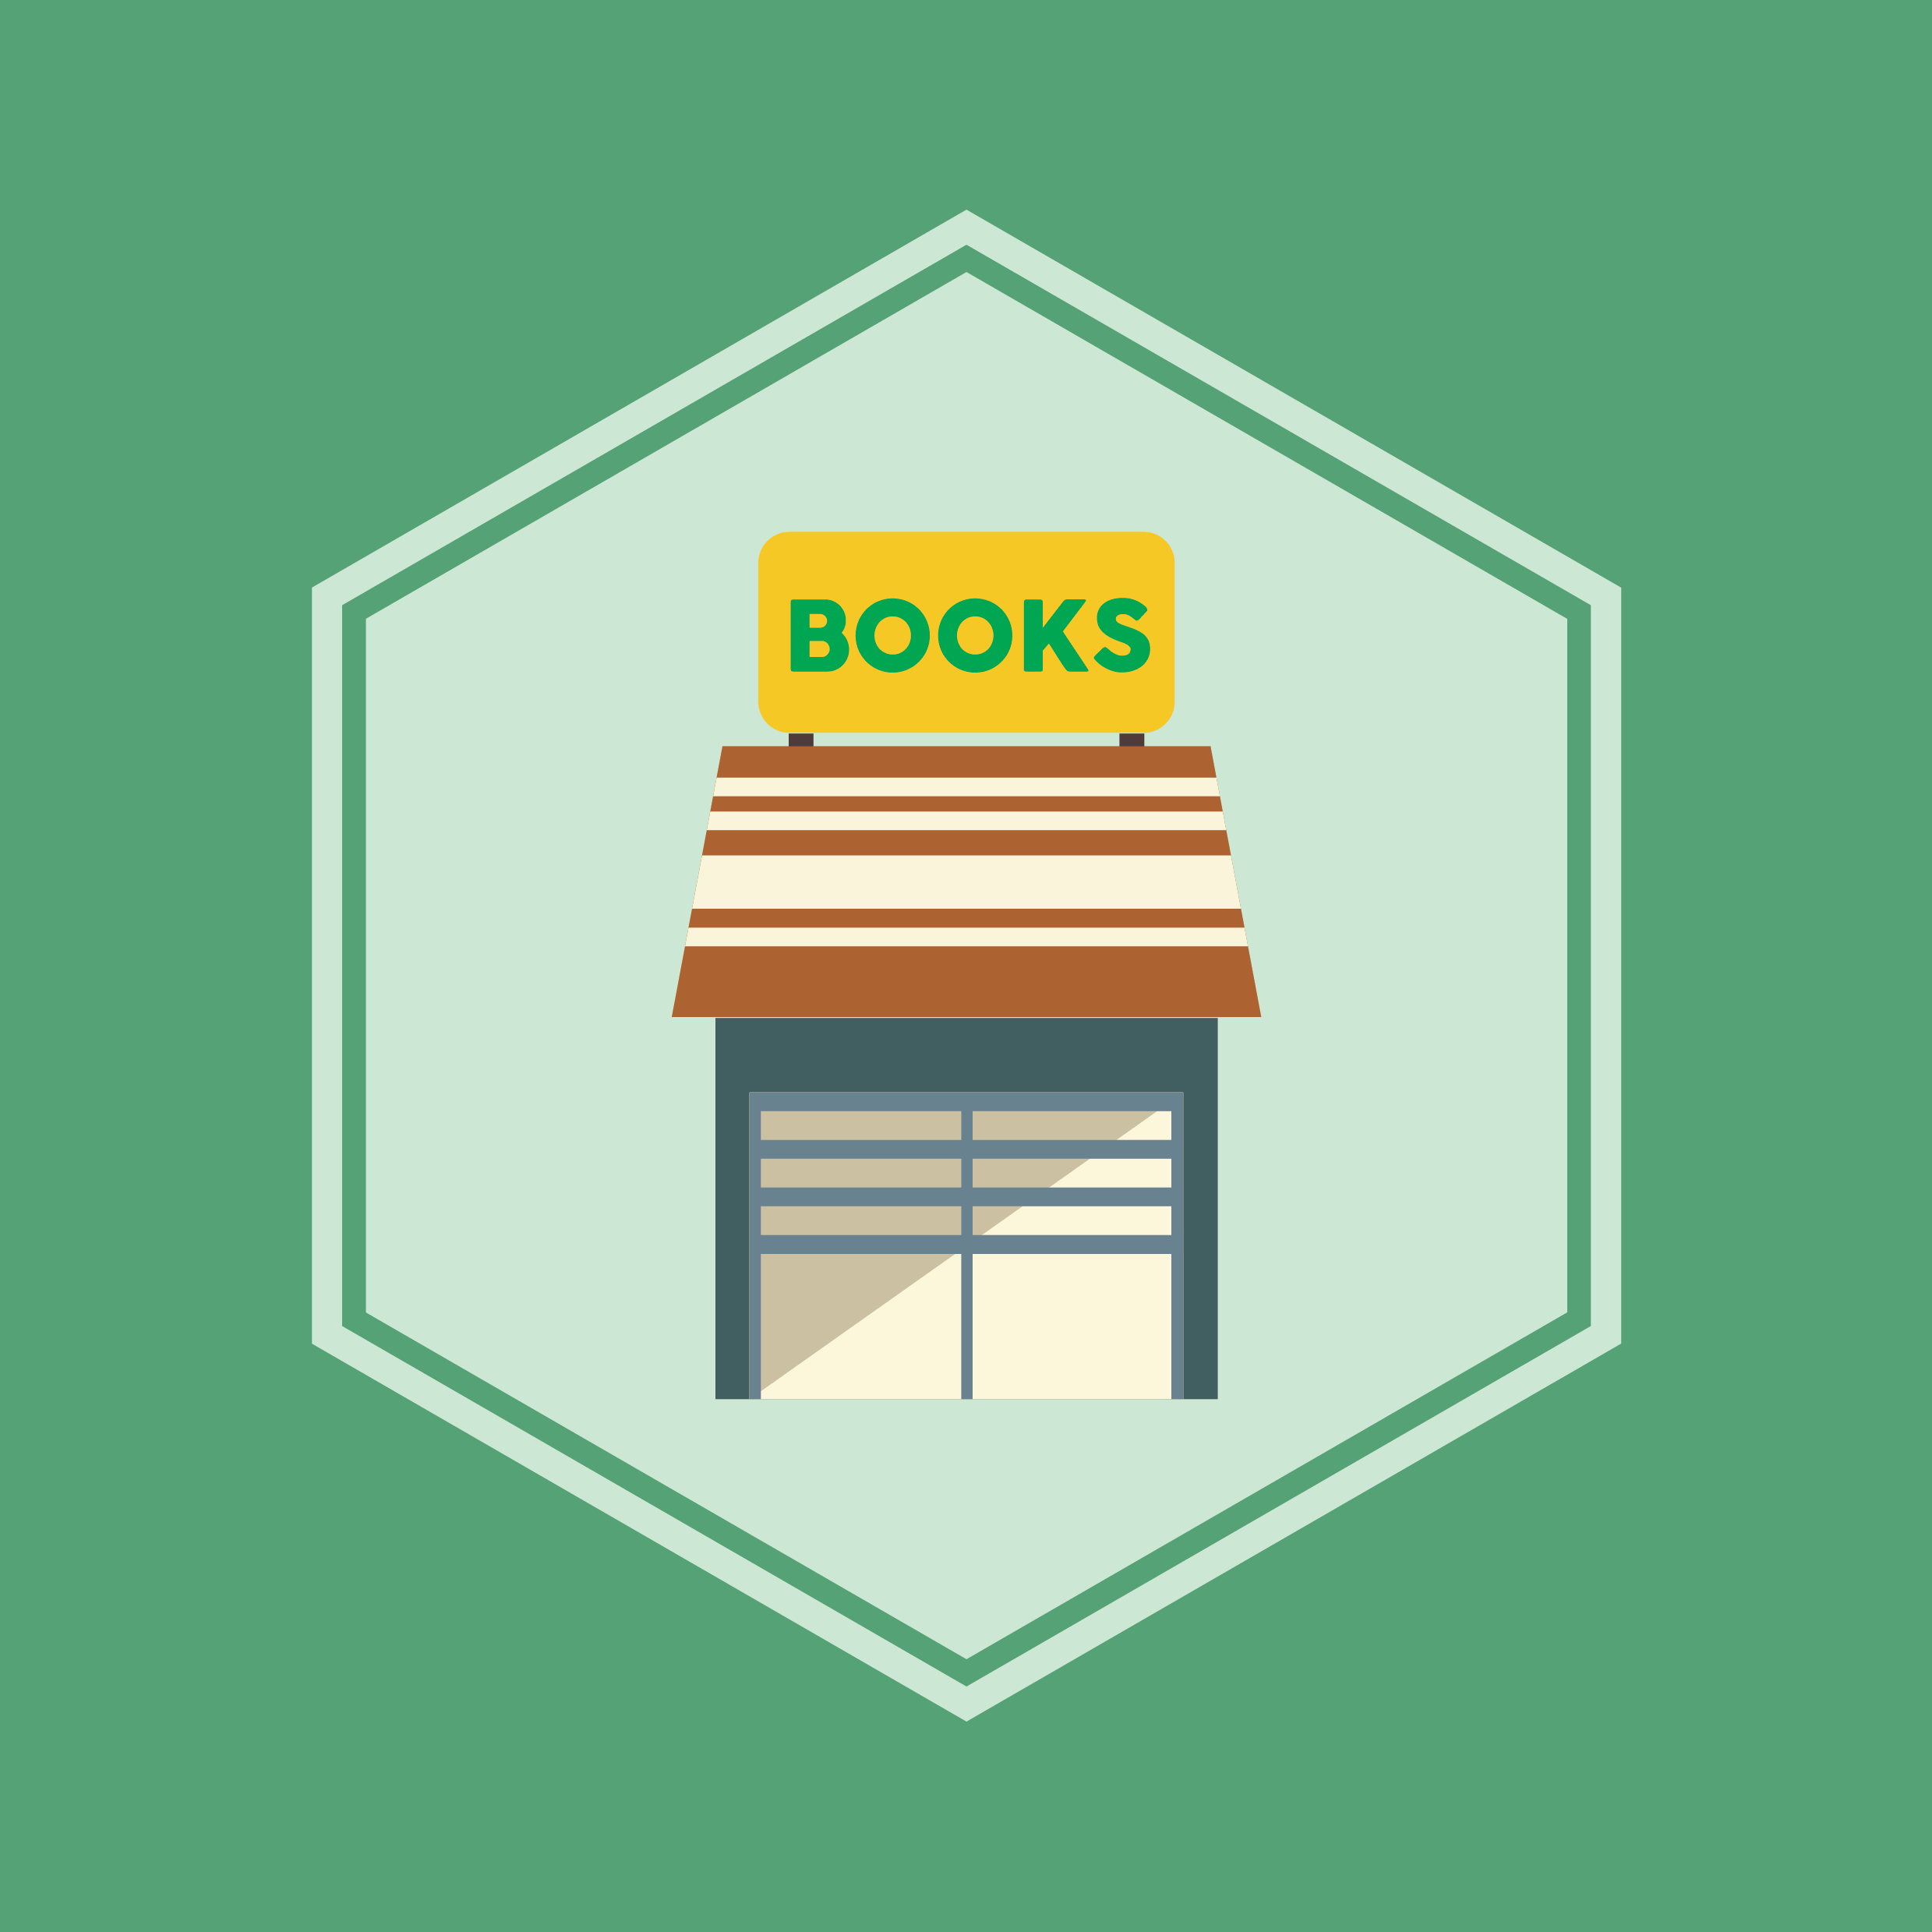 Bookstore Business Plan Template & Example [20 Updated] Inside Bookstore Business Plan Template